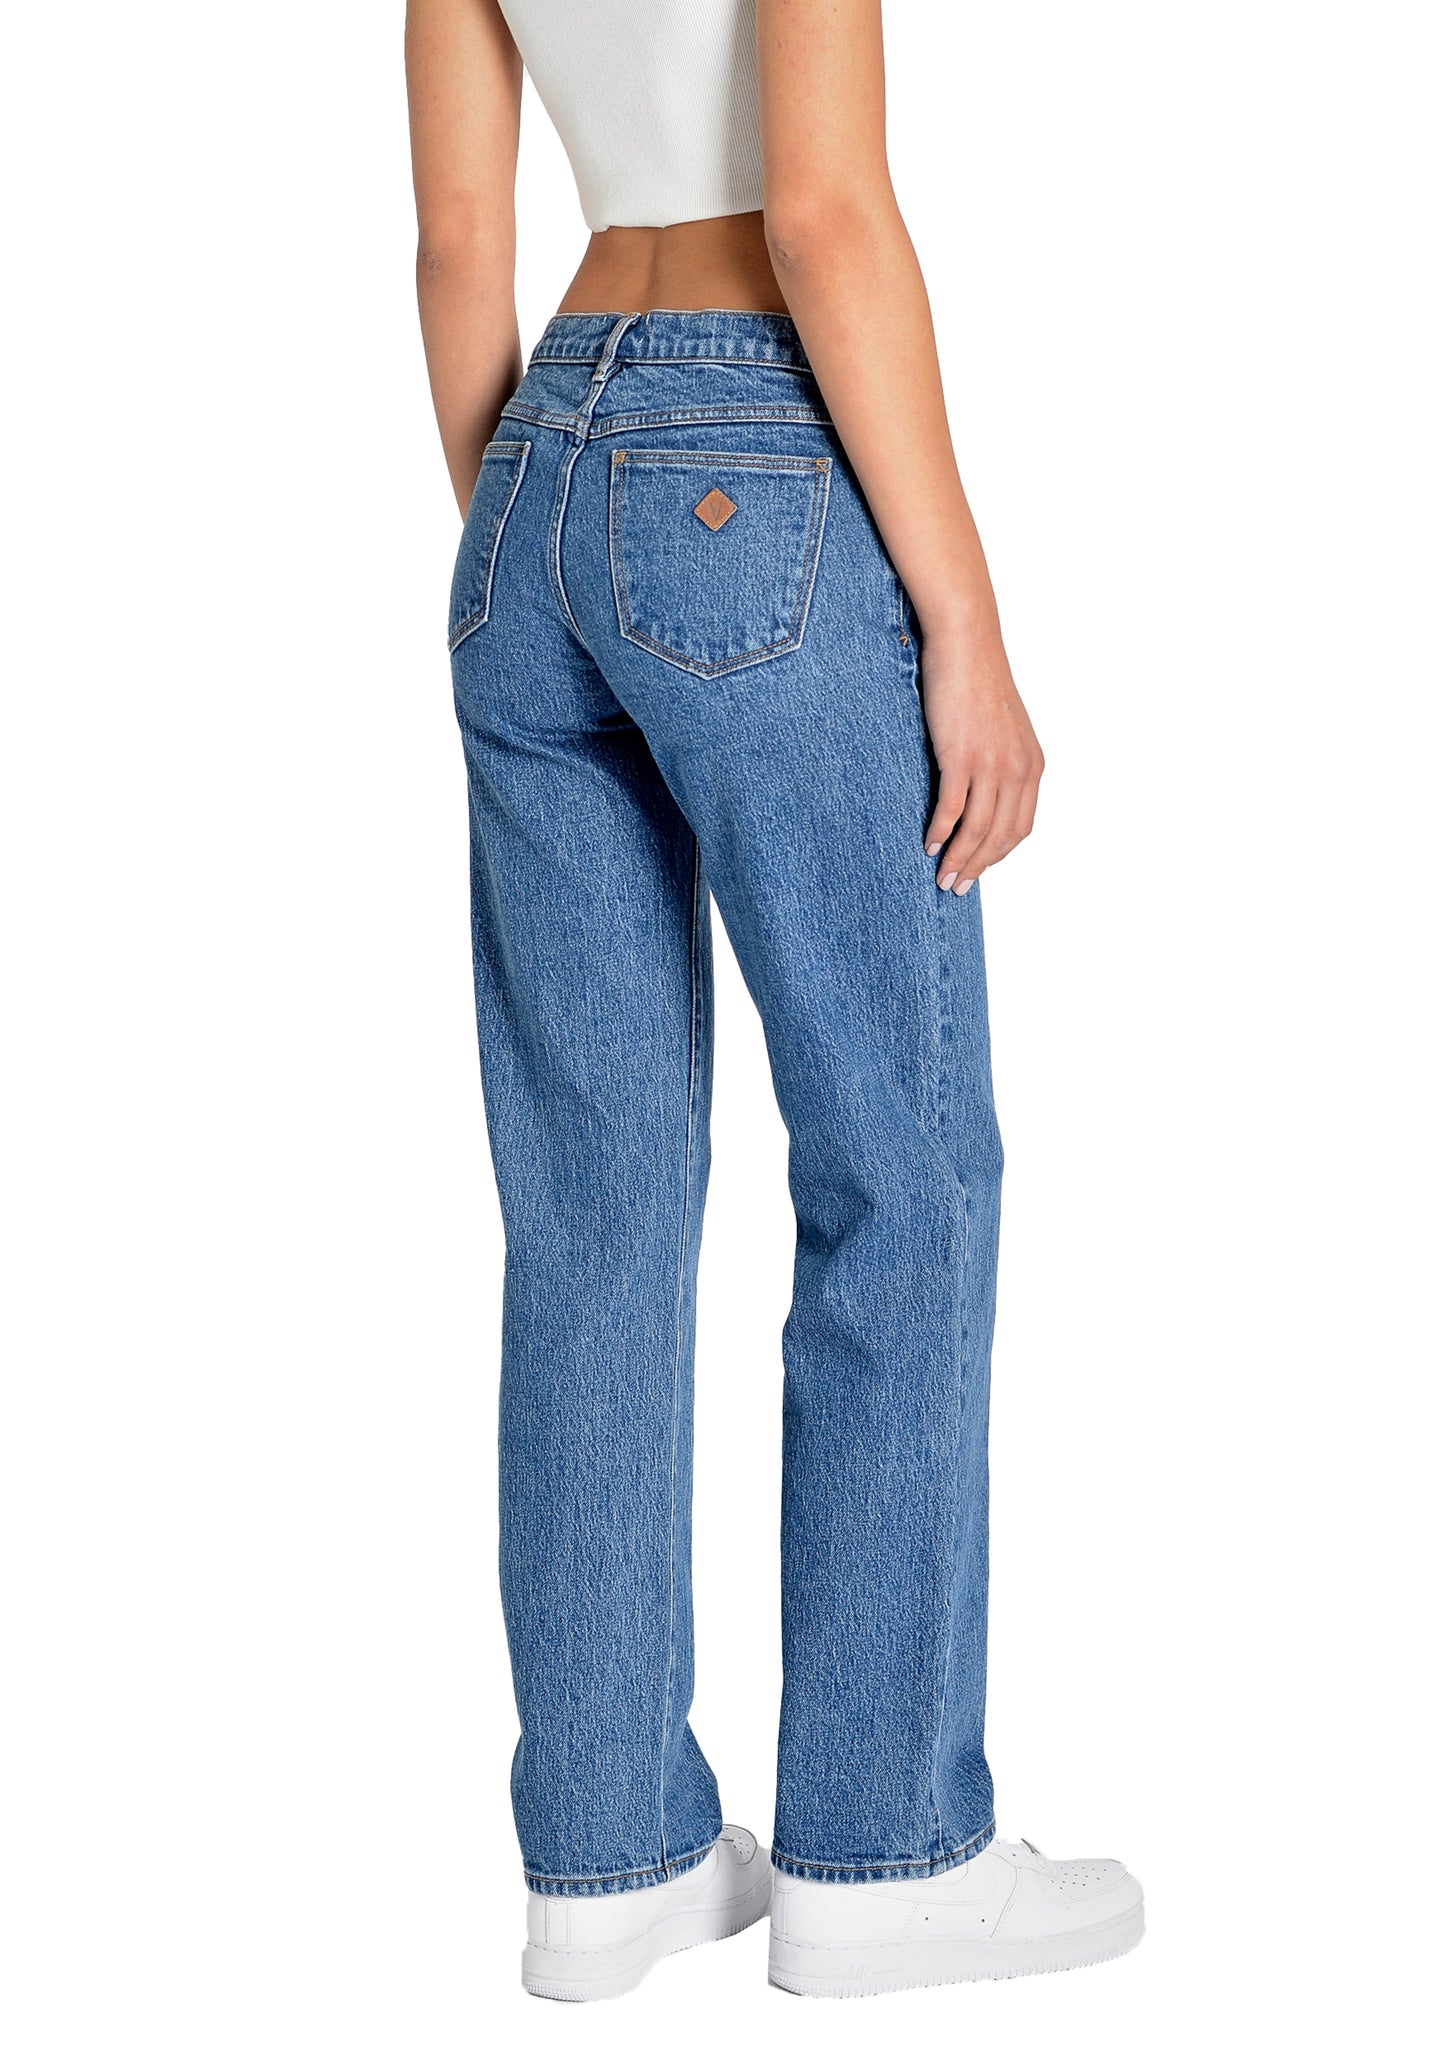 Abrand Jeans A 99 Low Straight Denim Jeans in Chantell